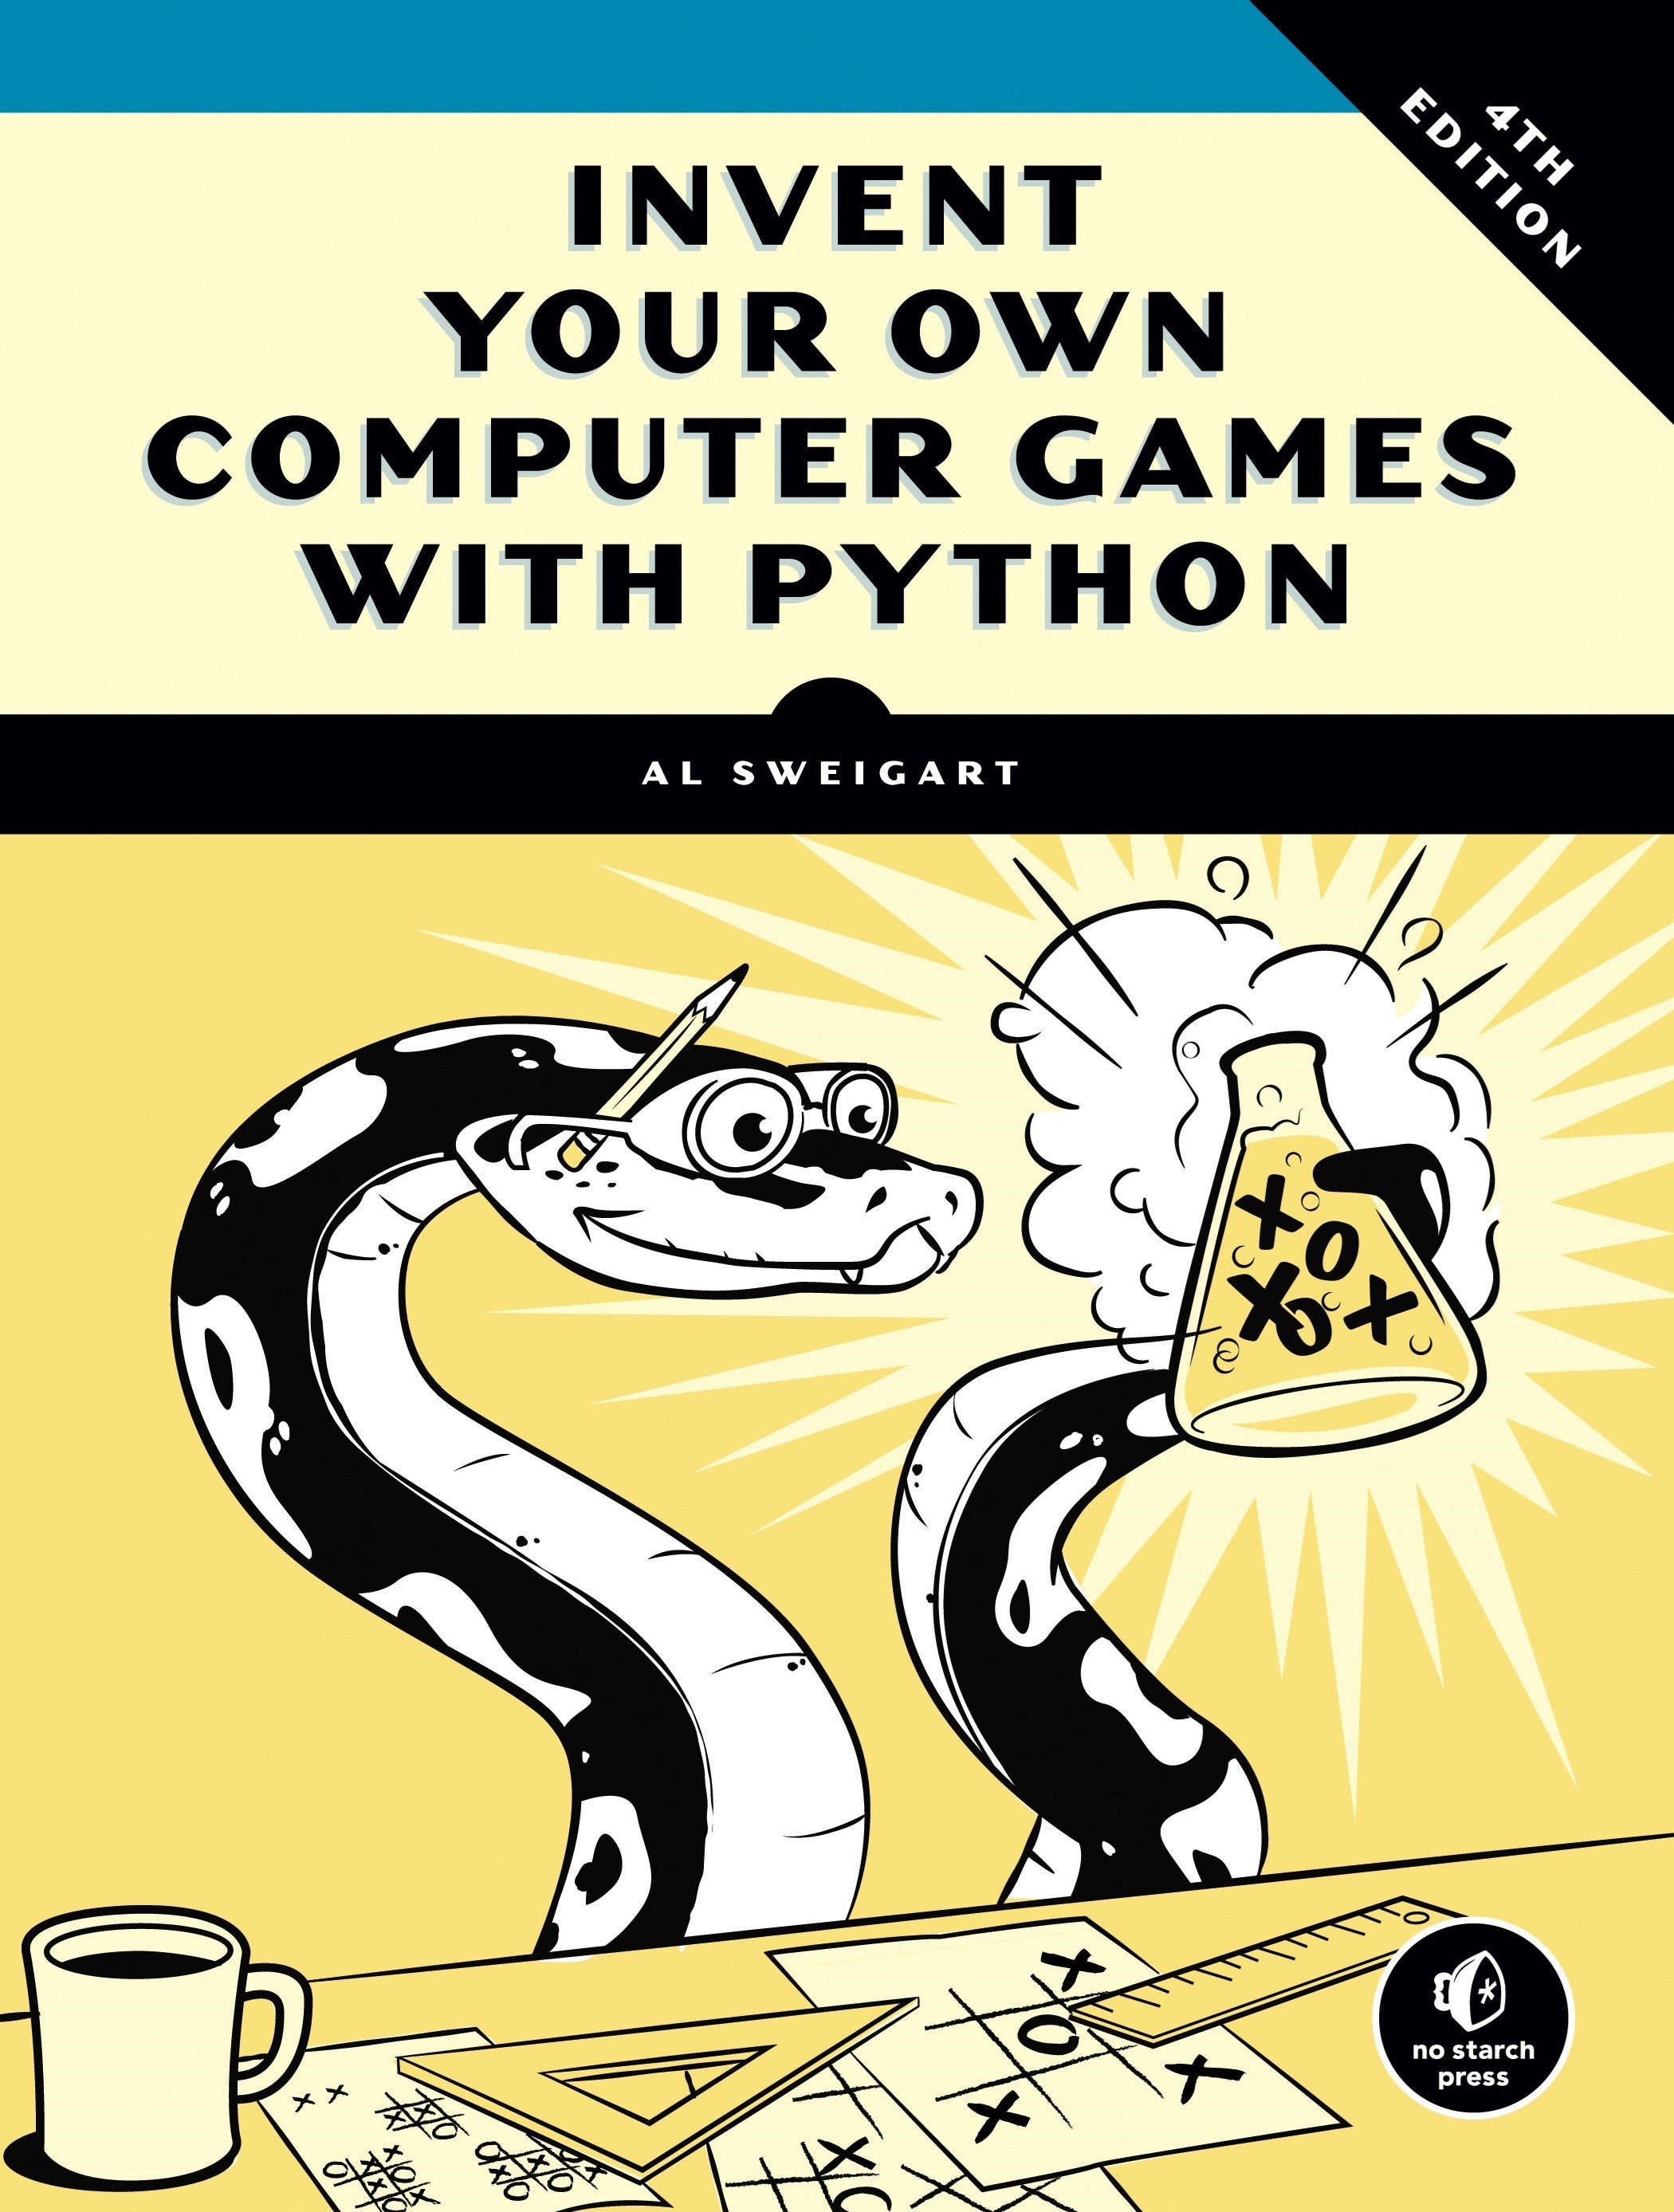 Invent Your Own Computer Games with Python, 4th Edition  (4th Edition)